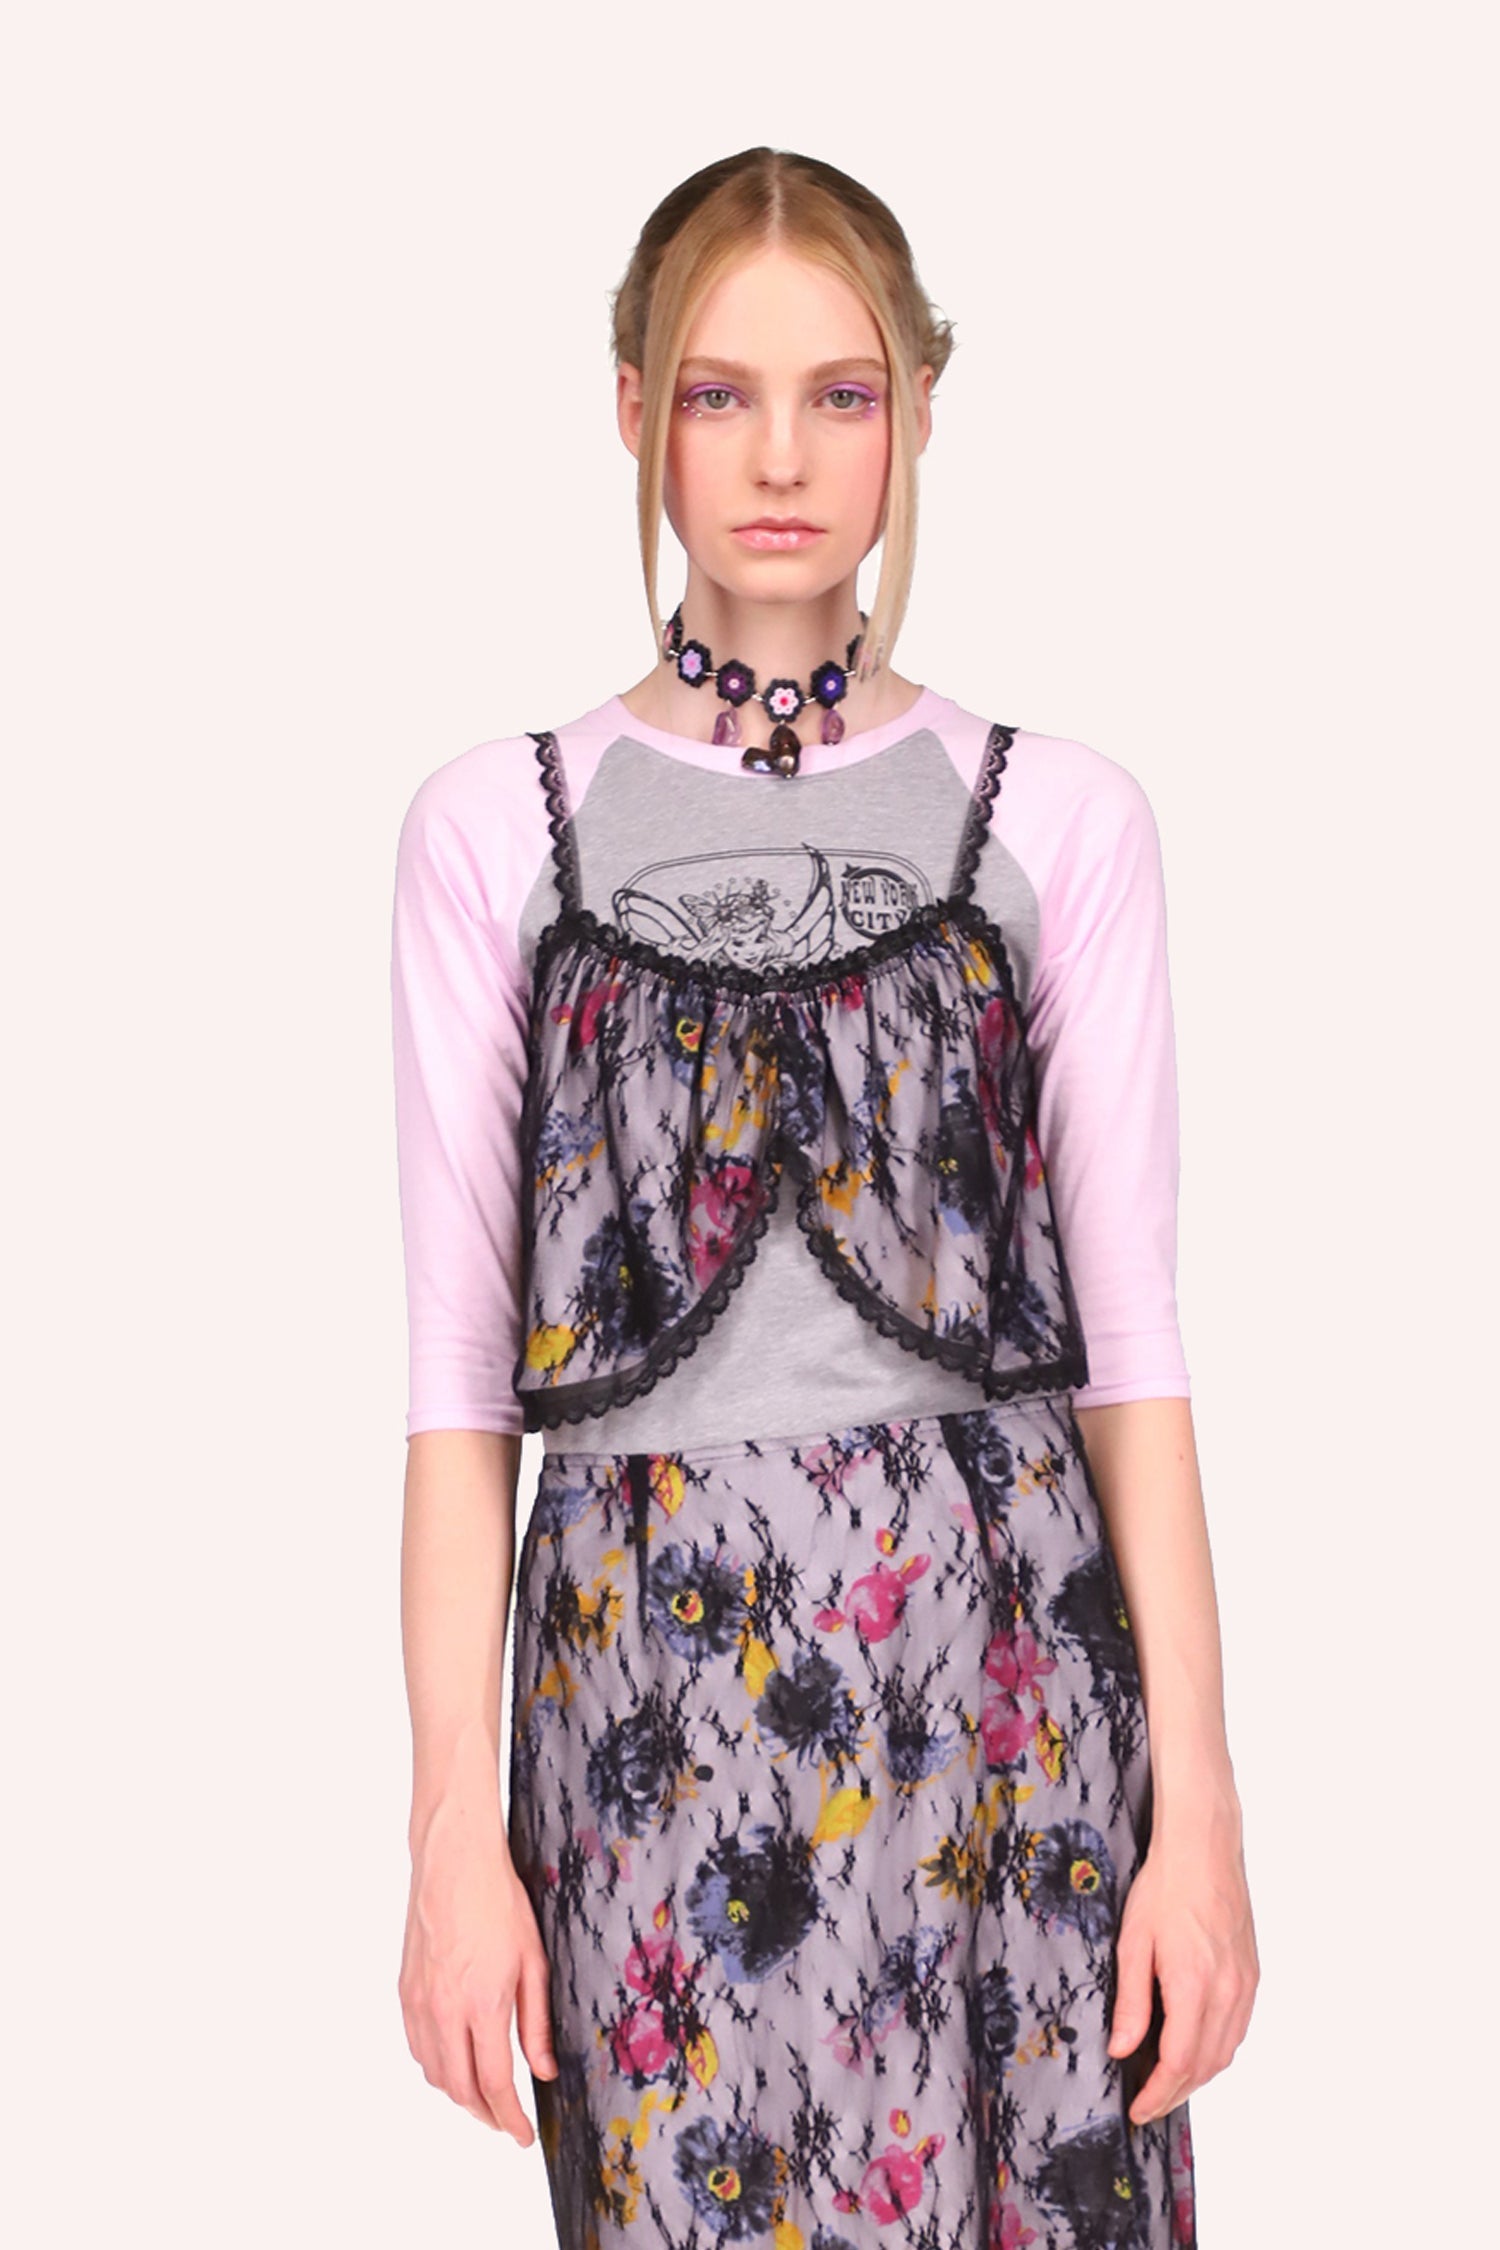 Lace Cropped Sketch Flower Cami, lilac, pink, and yellow, sleeveless, black laced straps and hems